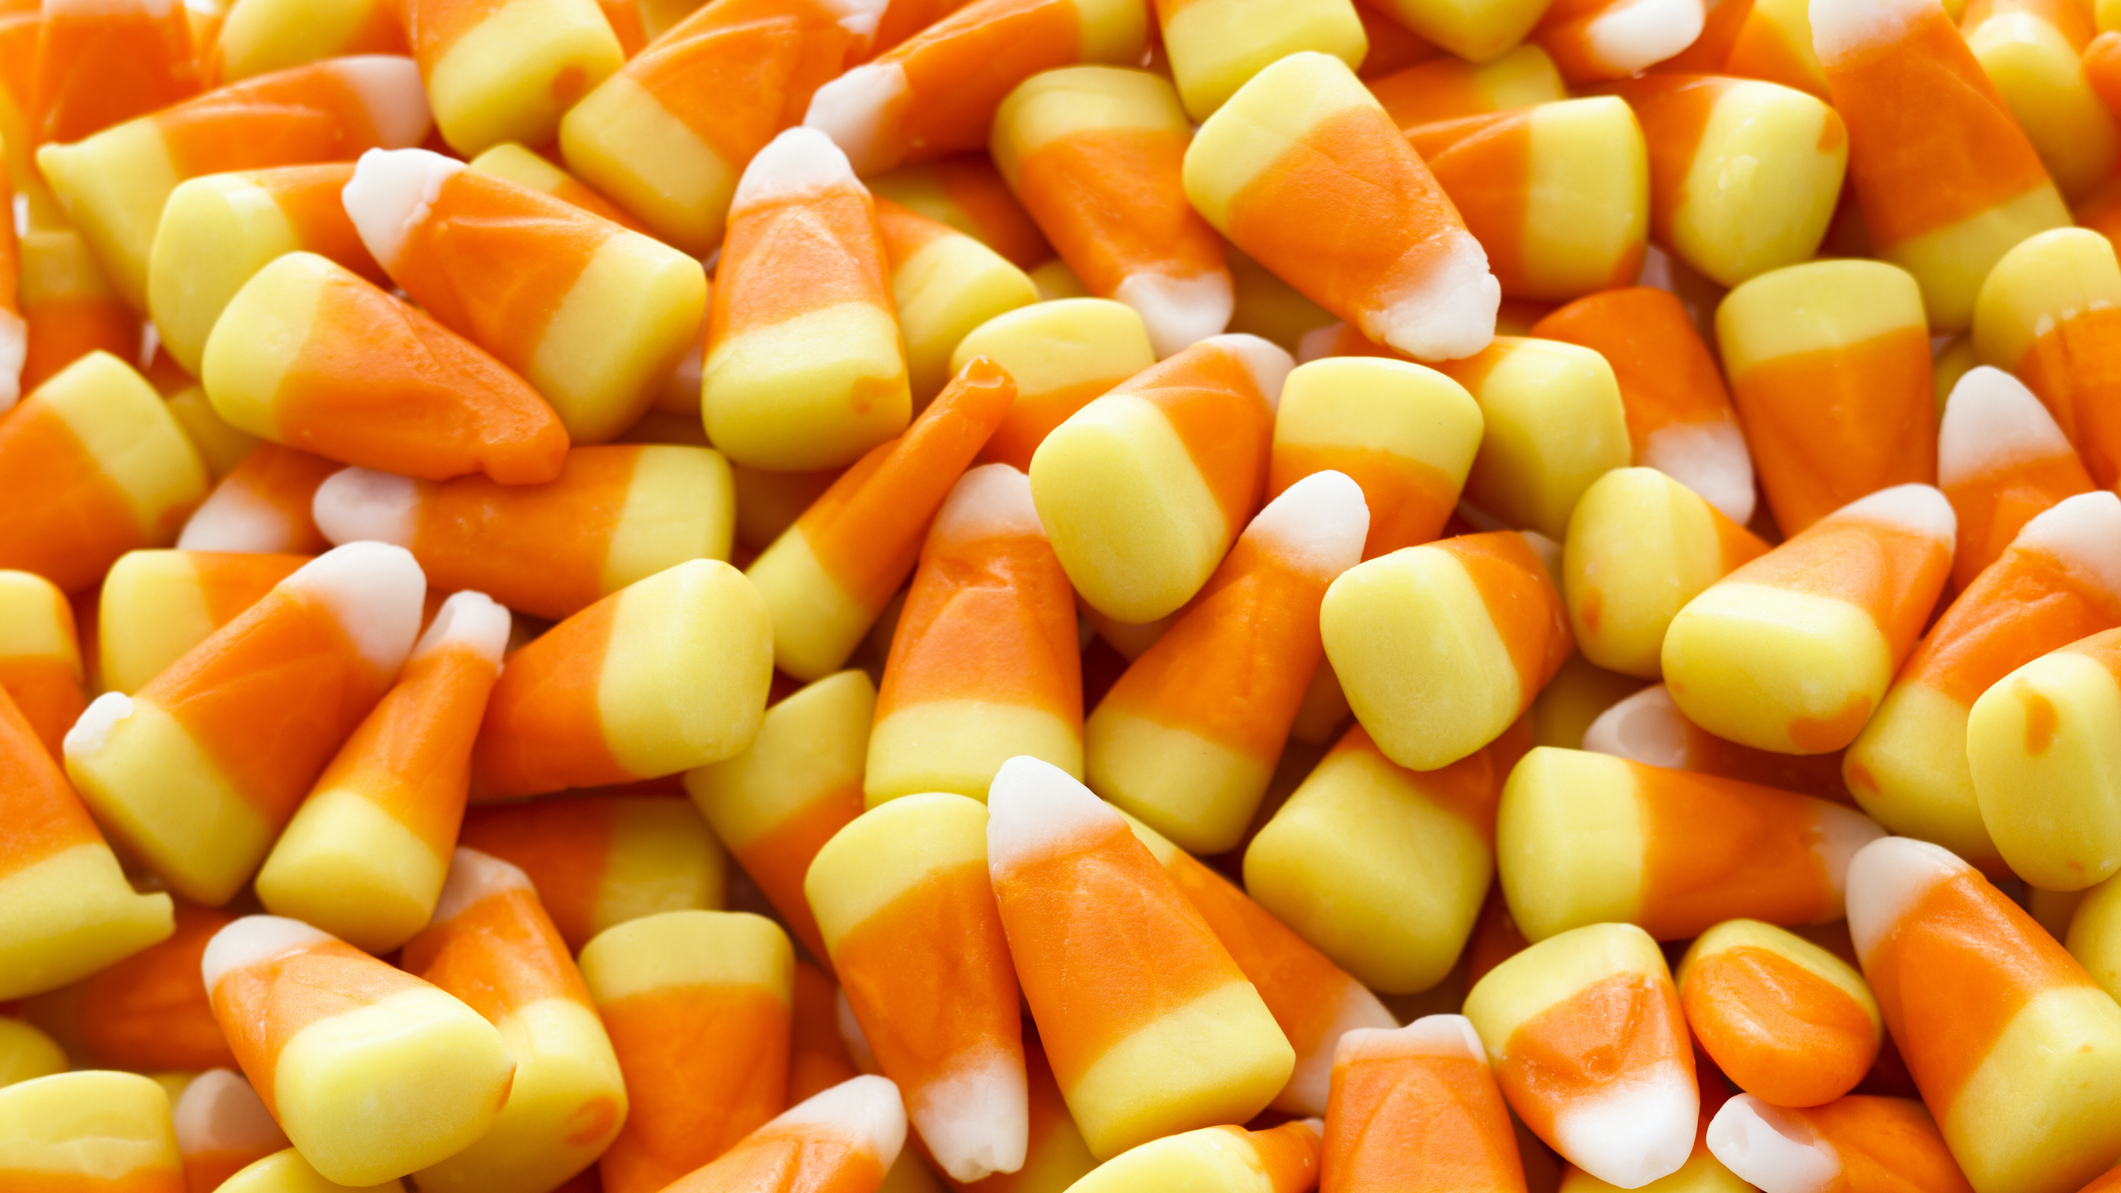 13 Unexpected Halloween Facts